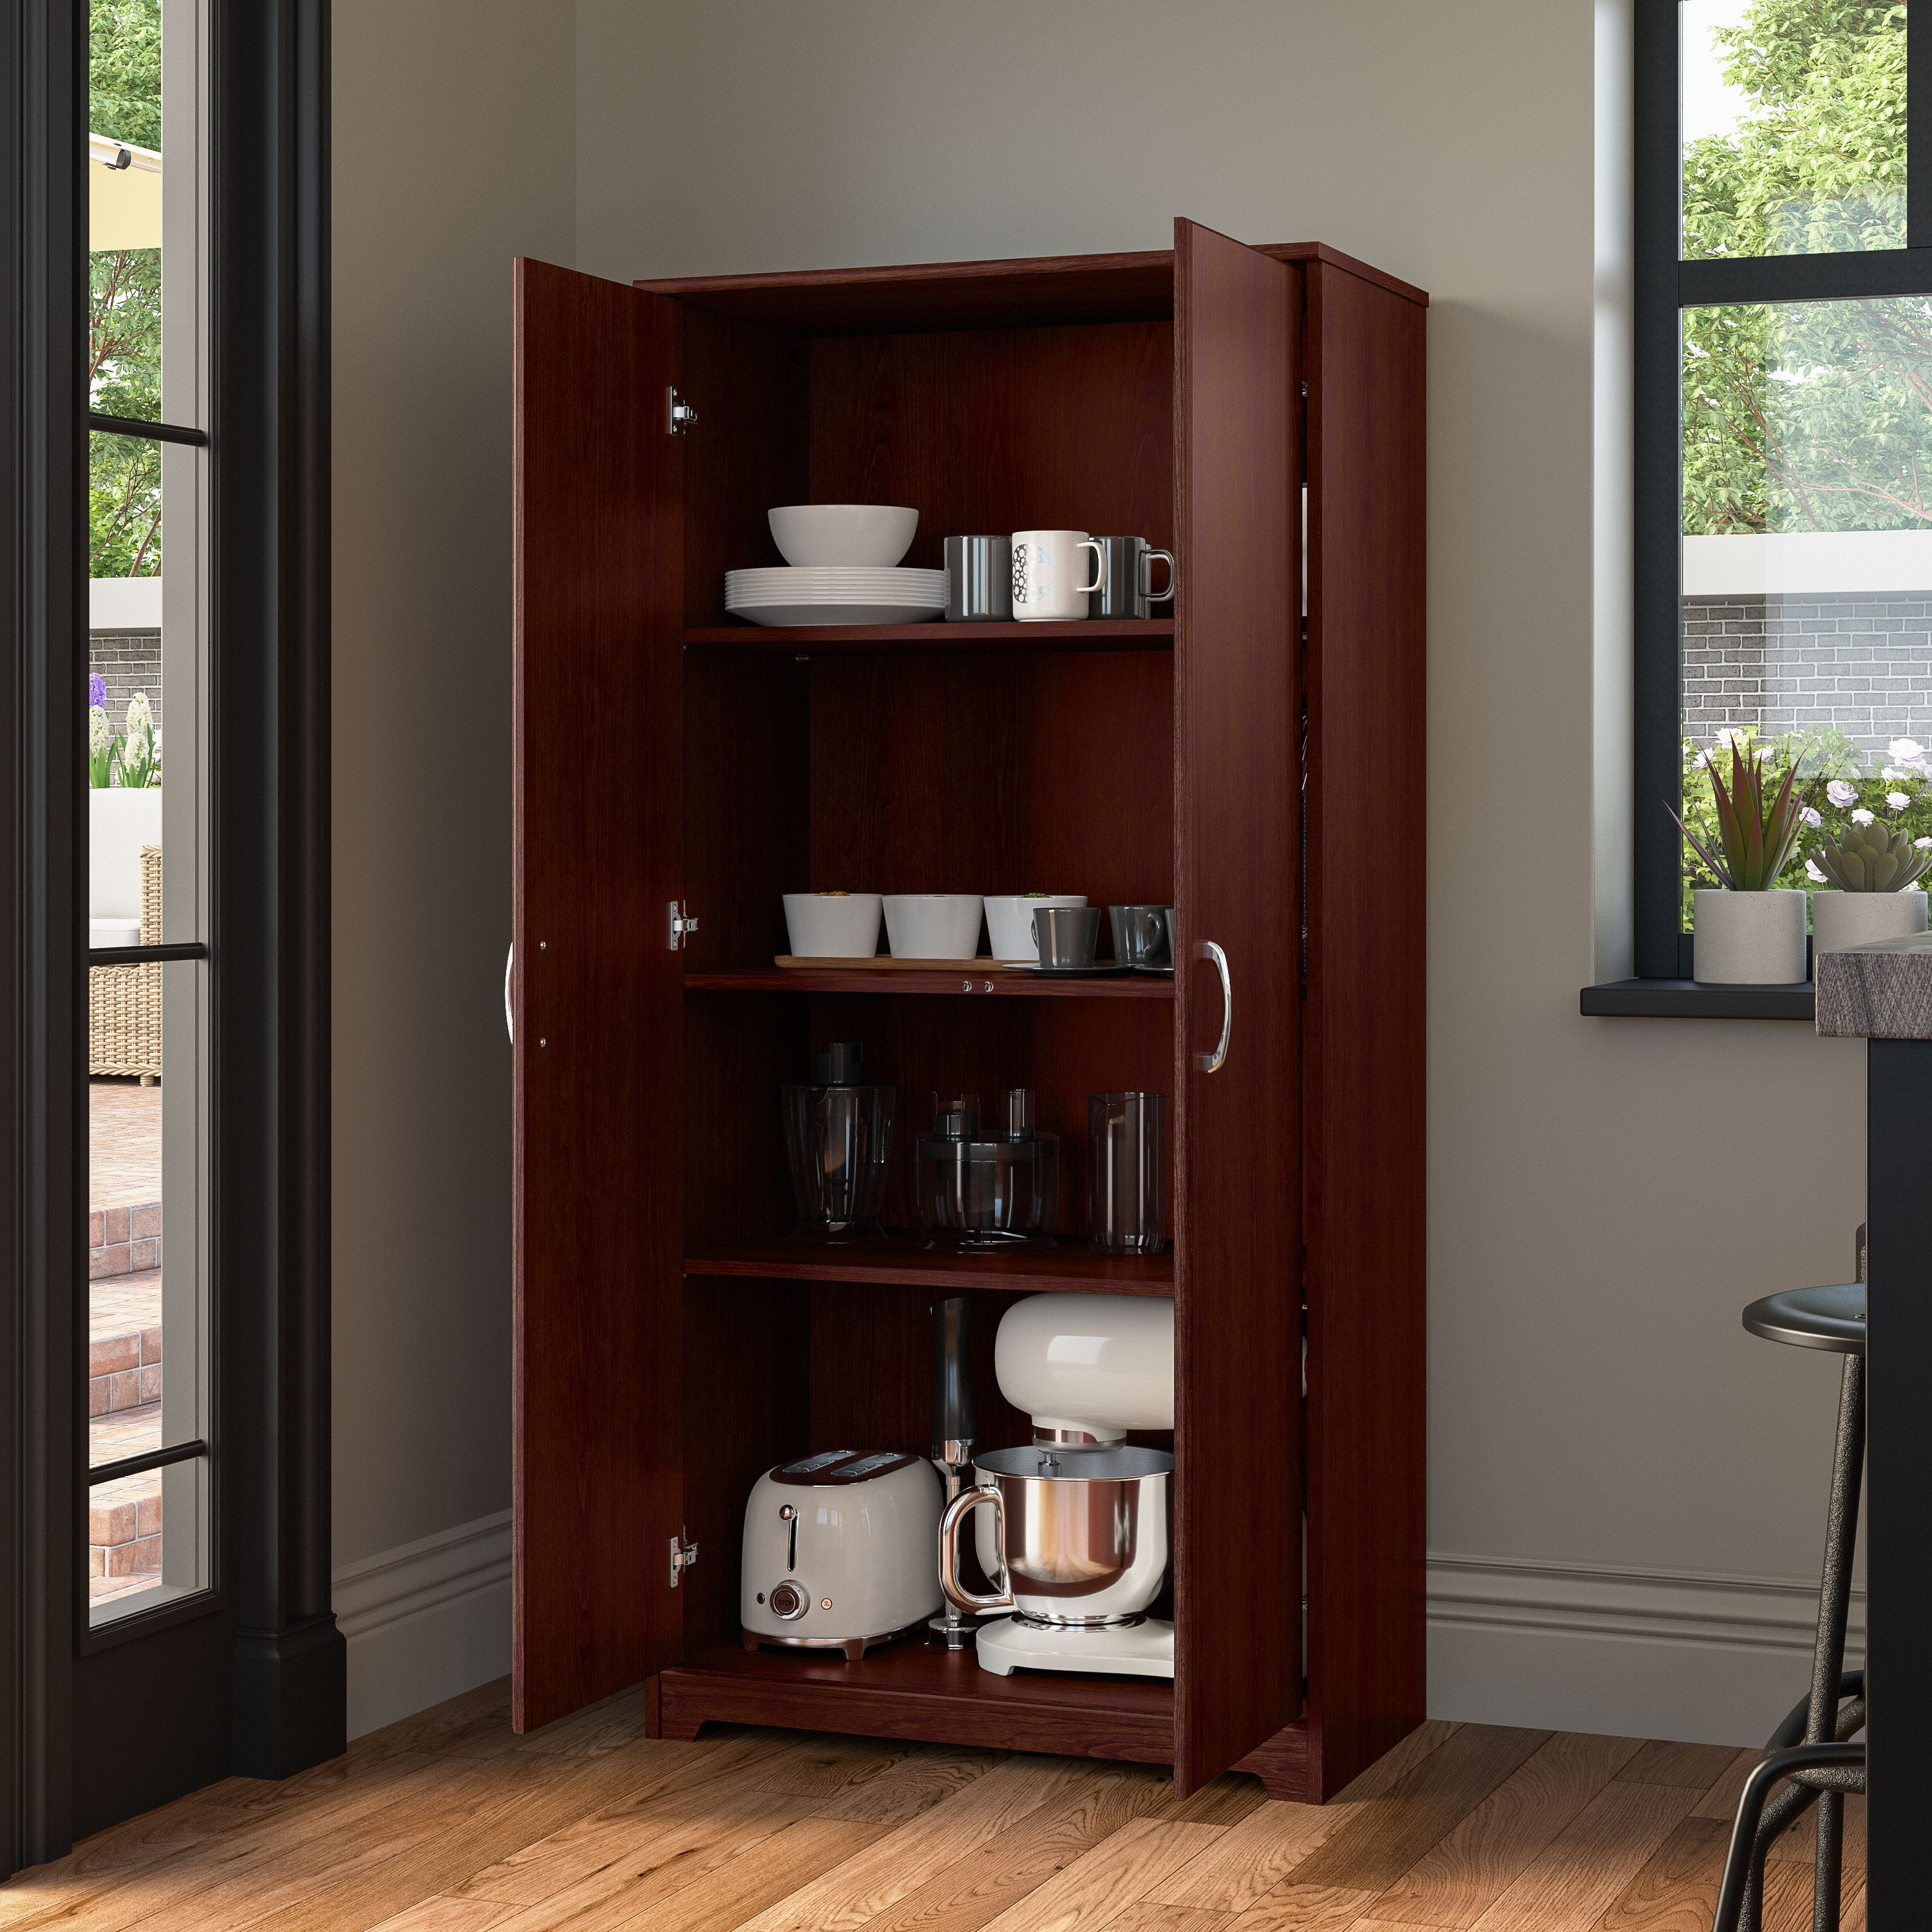 Shop Bush Furniture Cabot Tall Kitchen Pantry Cabinet with Doors 06 WC31499-Z #color_harvest cherry